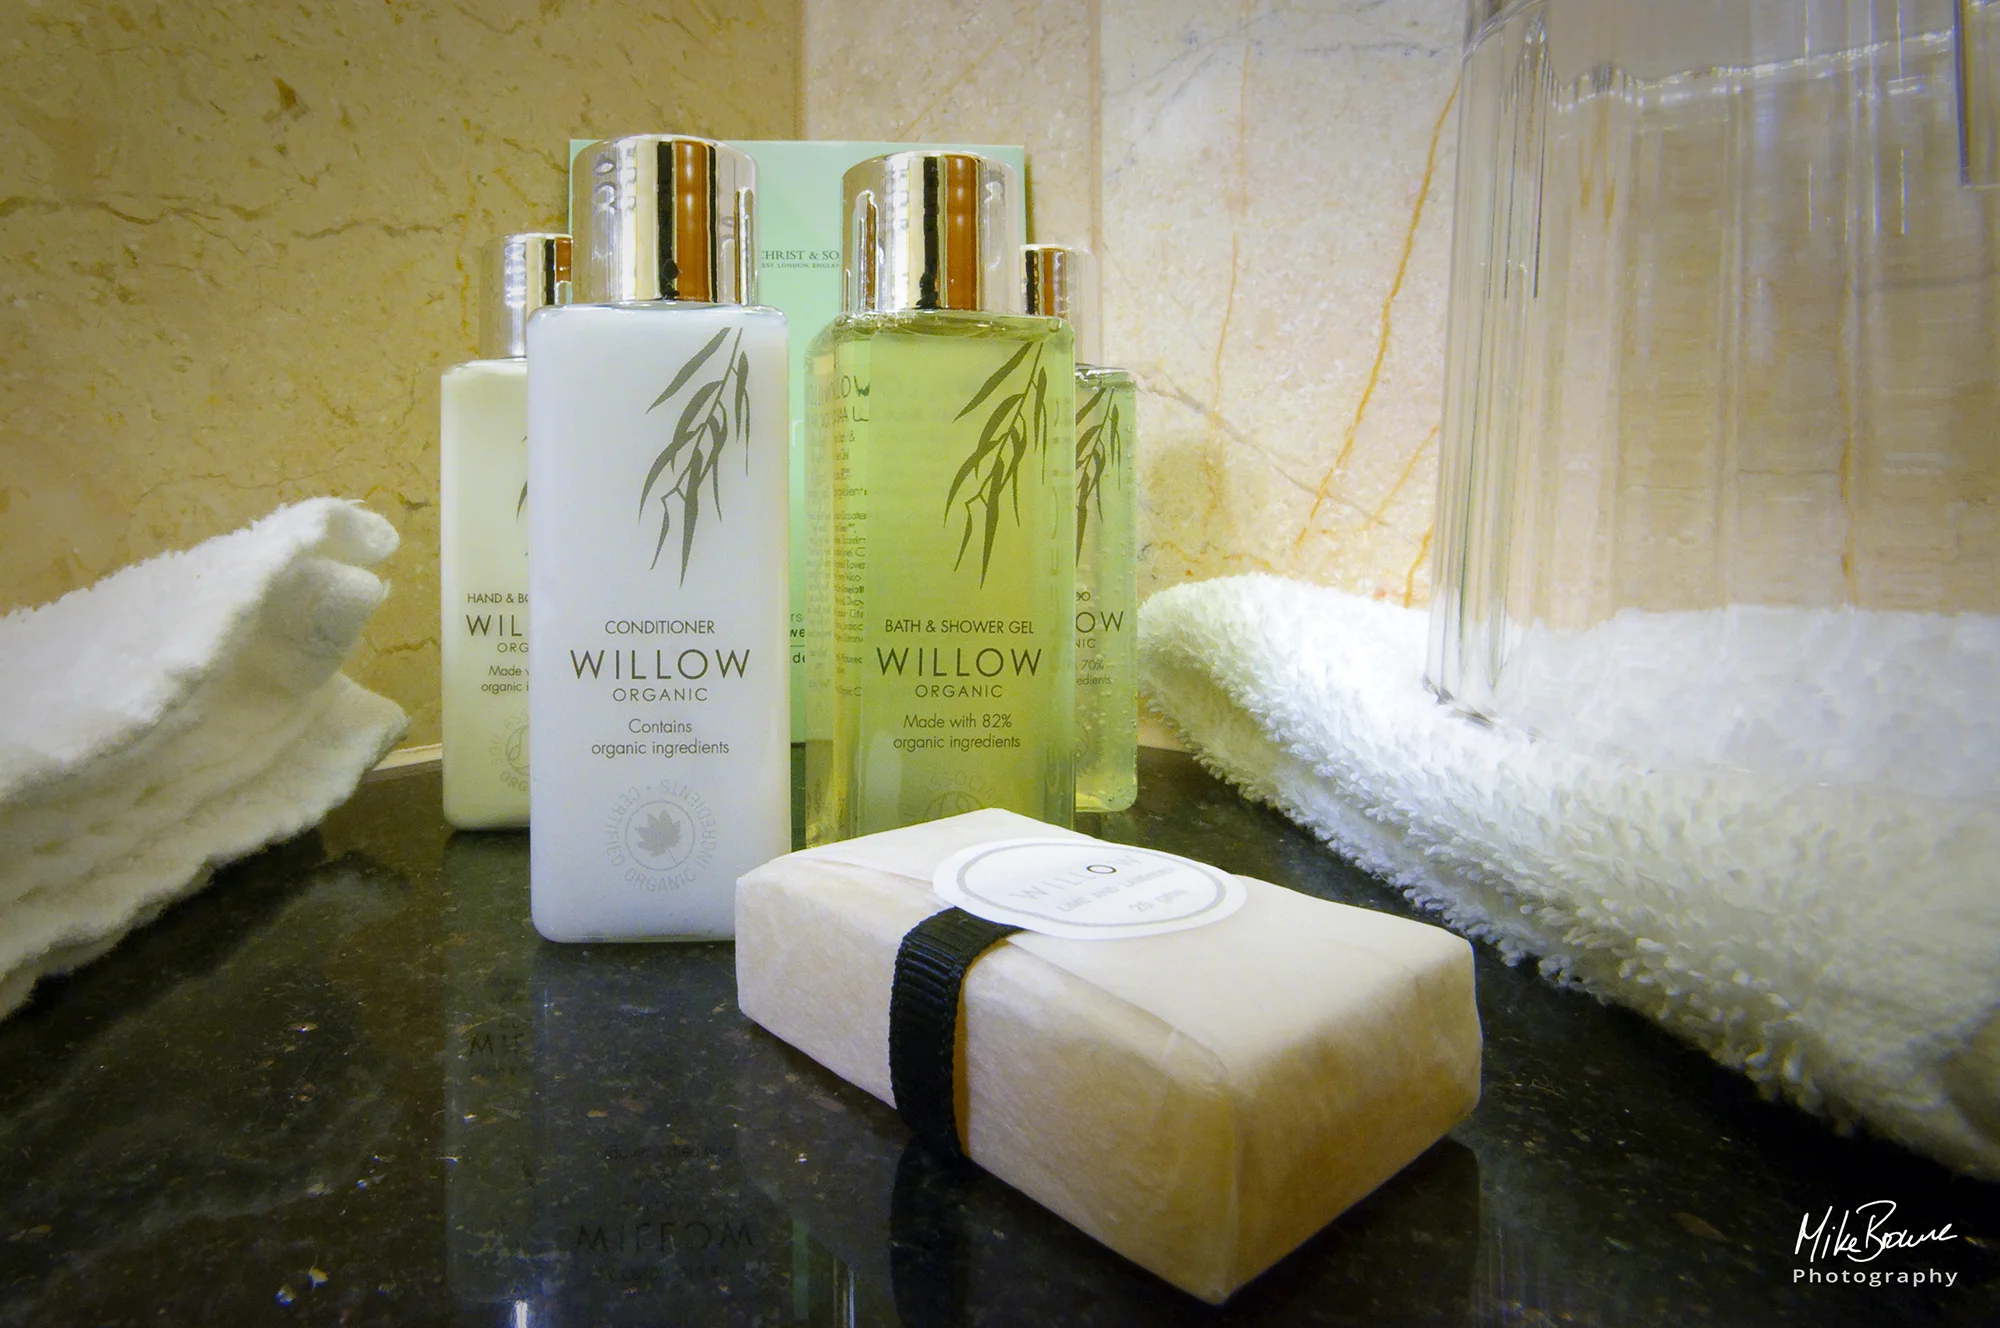 Willow soap bar, shampoo and conditioner with towels on marble stand